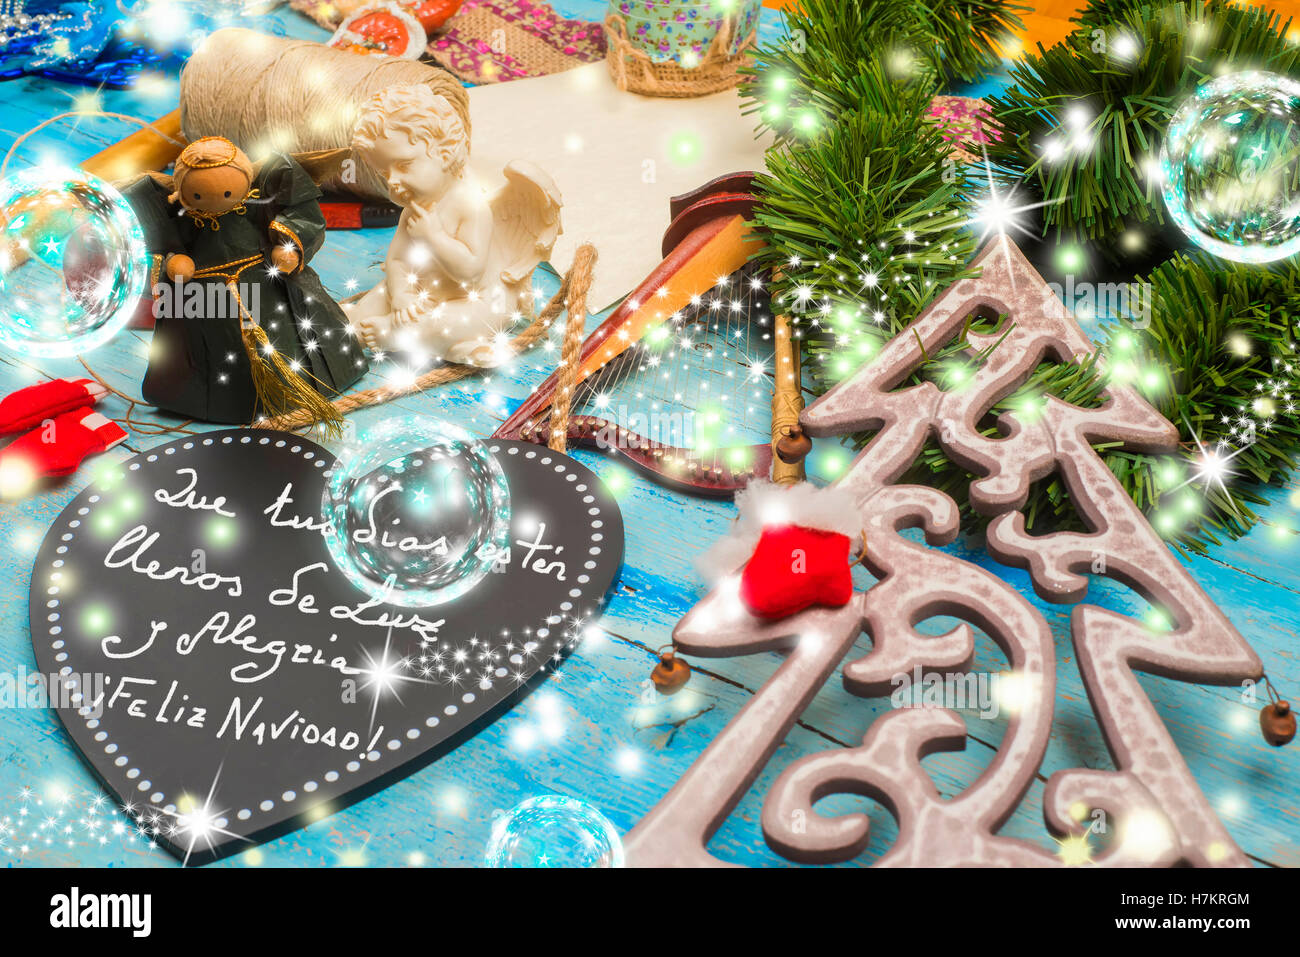 Christmas greetings card, Christmas ornaments and good wishes message in Spanish Language Stock Photo